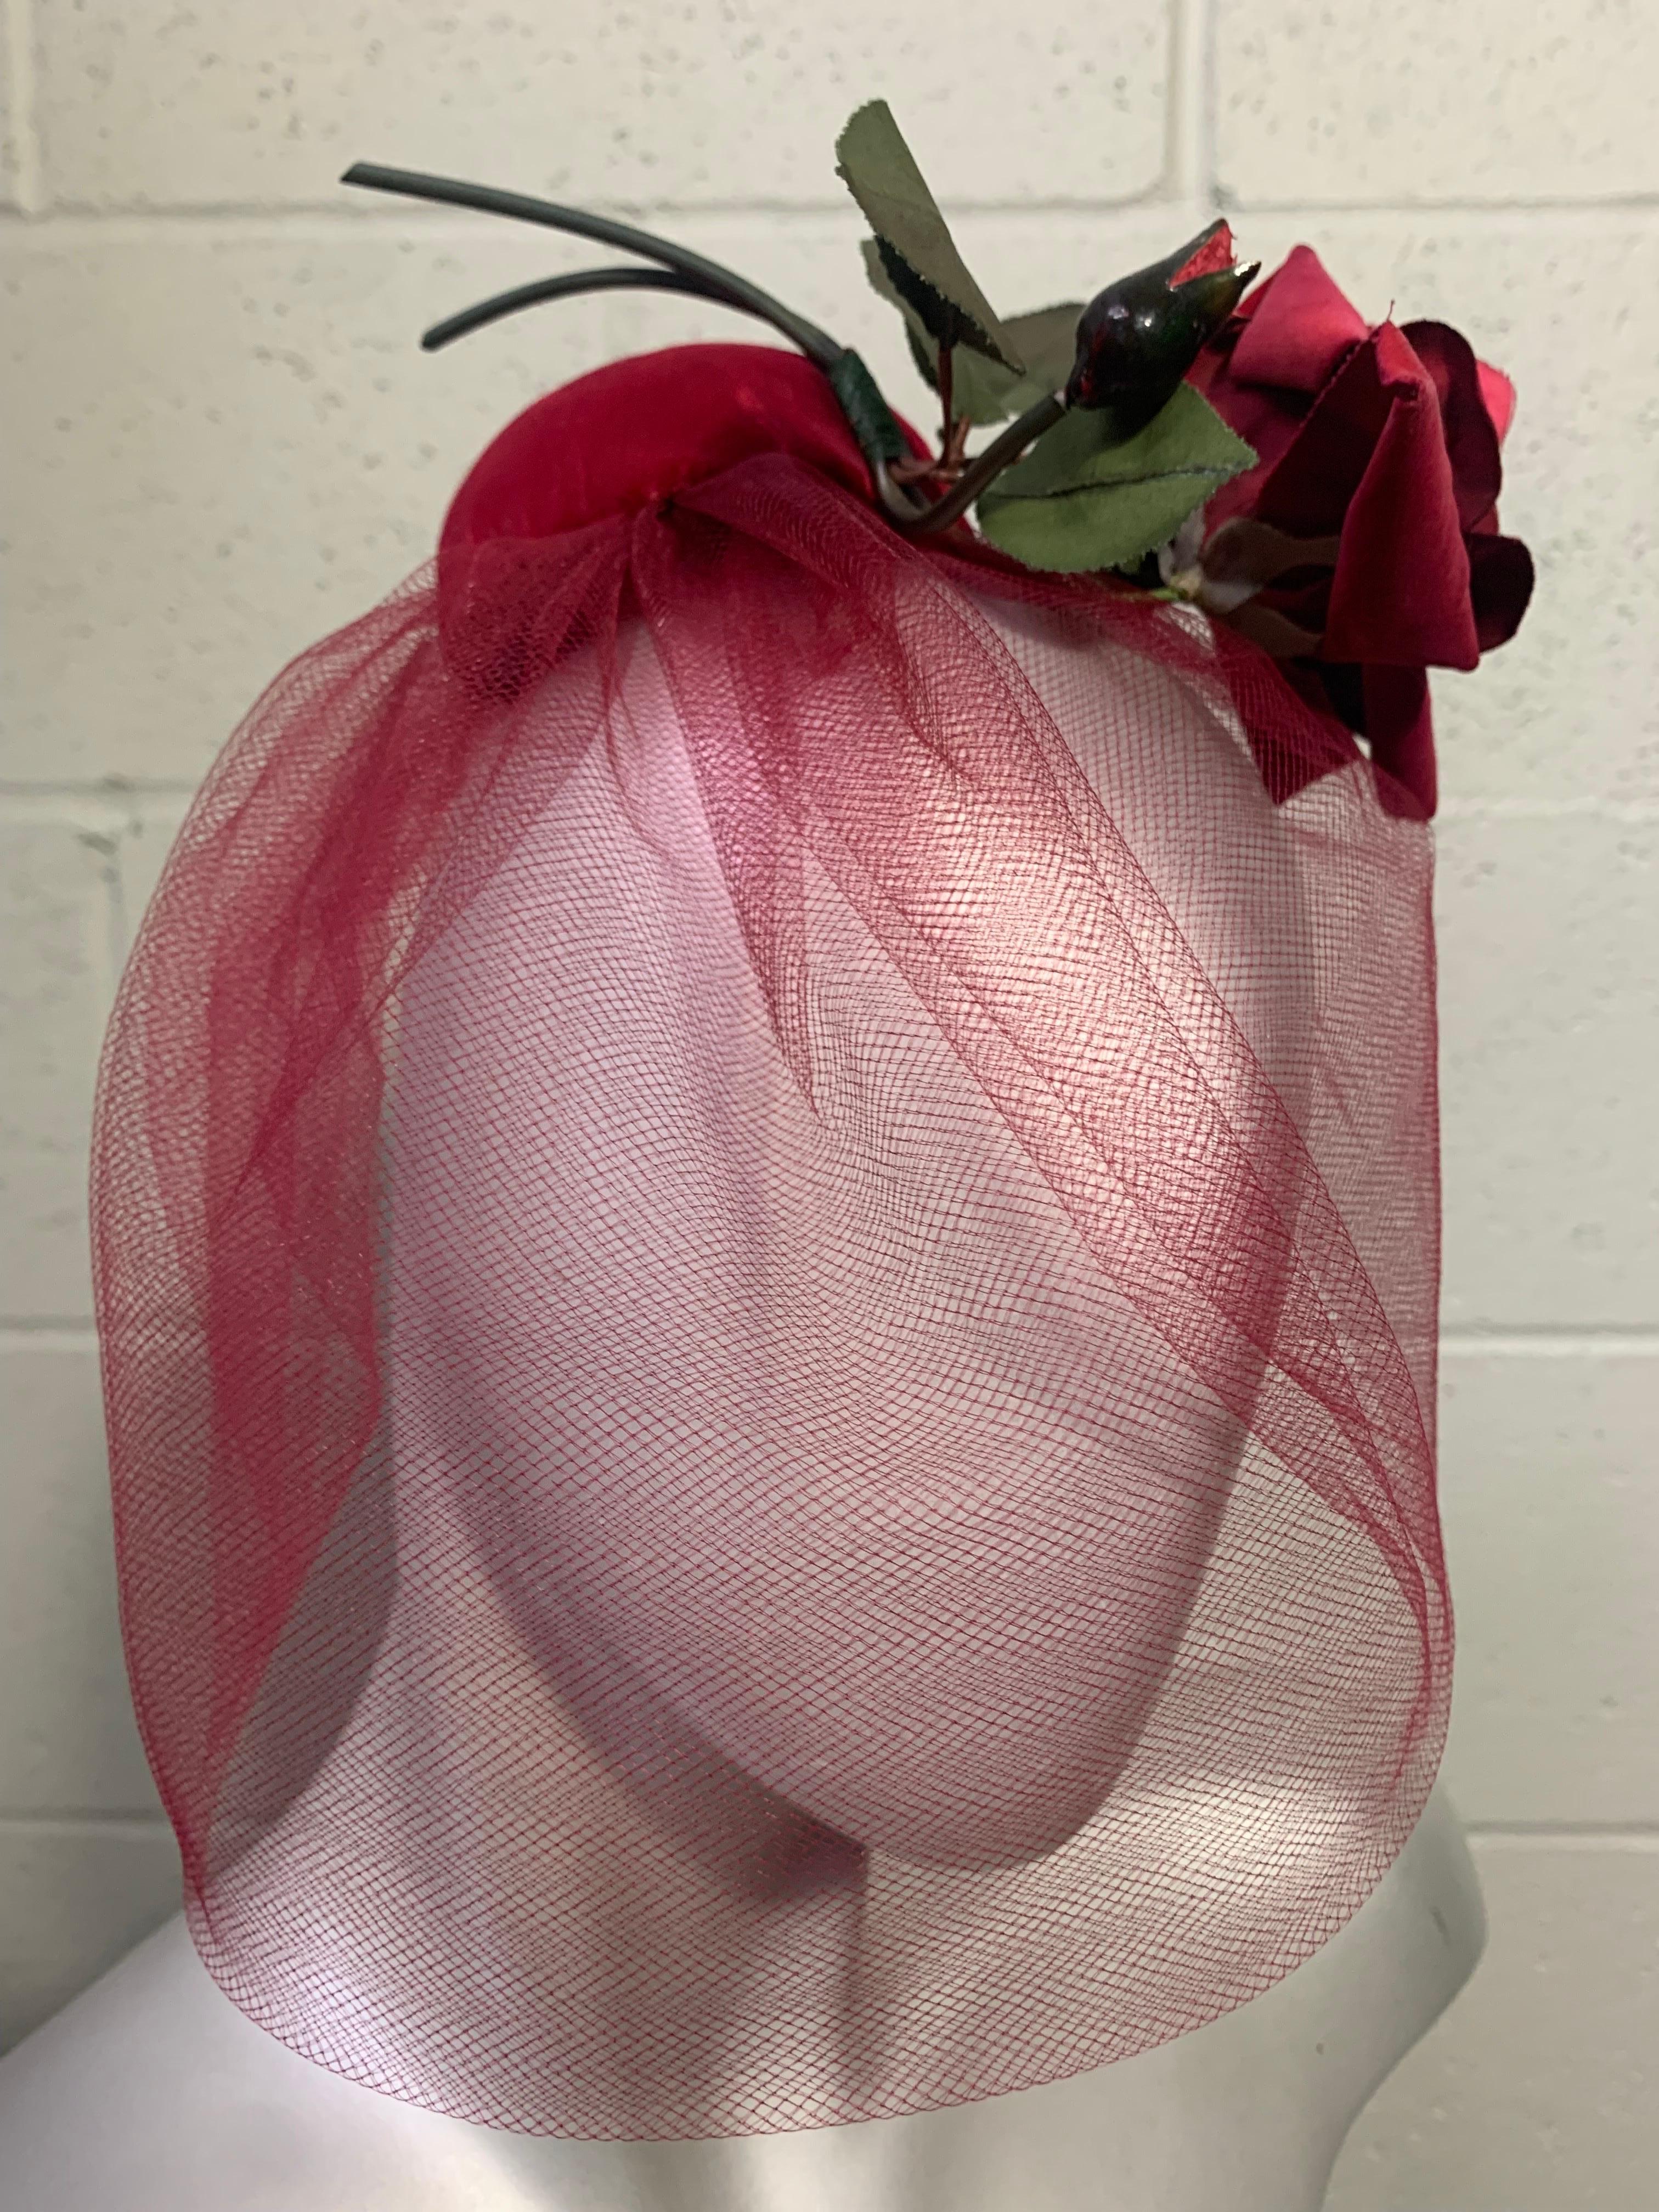 1960s Miss Sally Victor Diminutive Fuchsia Velvet Pillbox Hat with Tulle Veil and Full Stemmed Rose:  An striking and iconic design from a preeminent milliner. One size fits all with original combs included for securing 